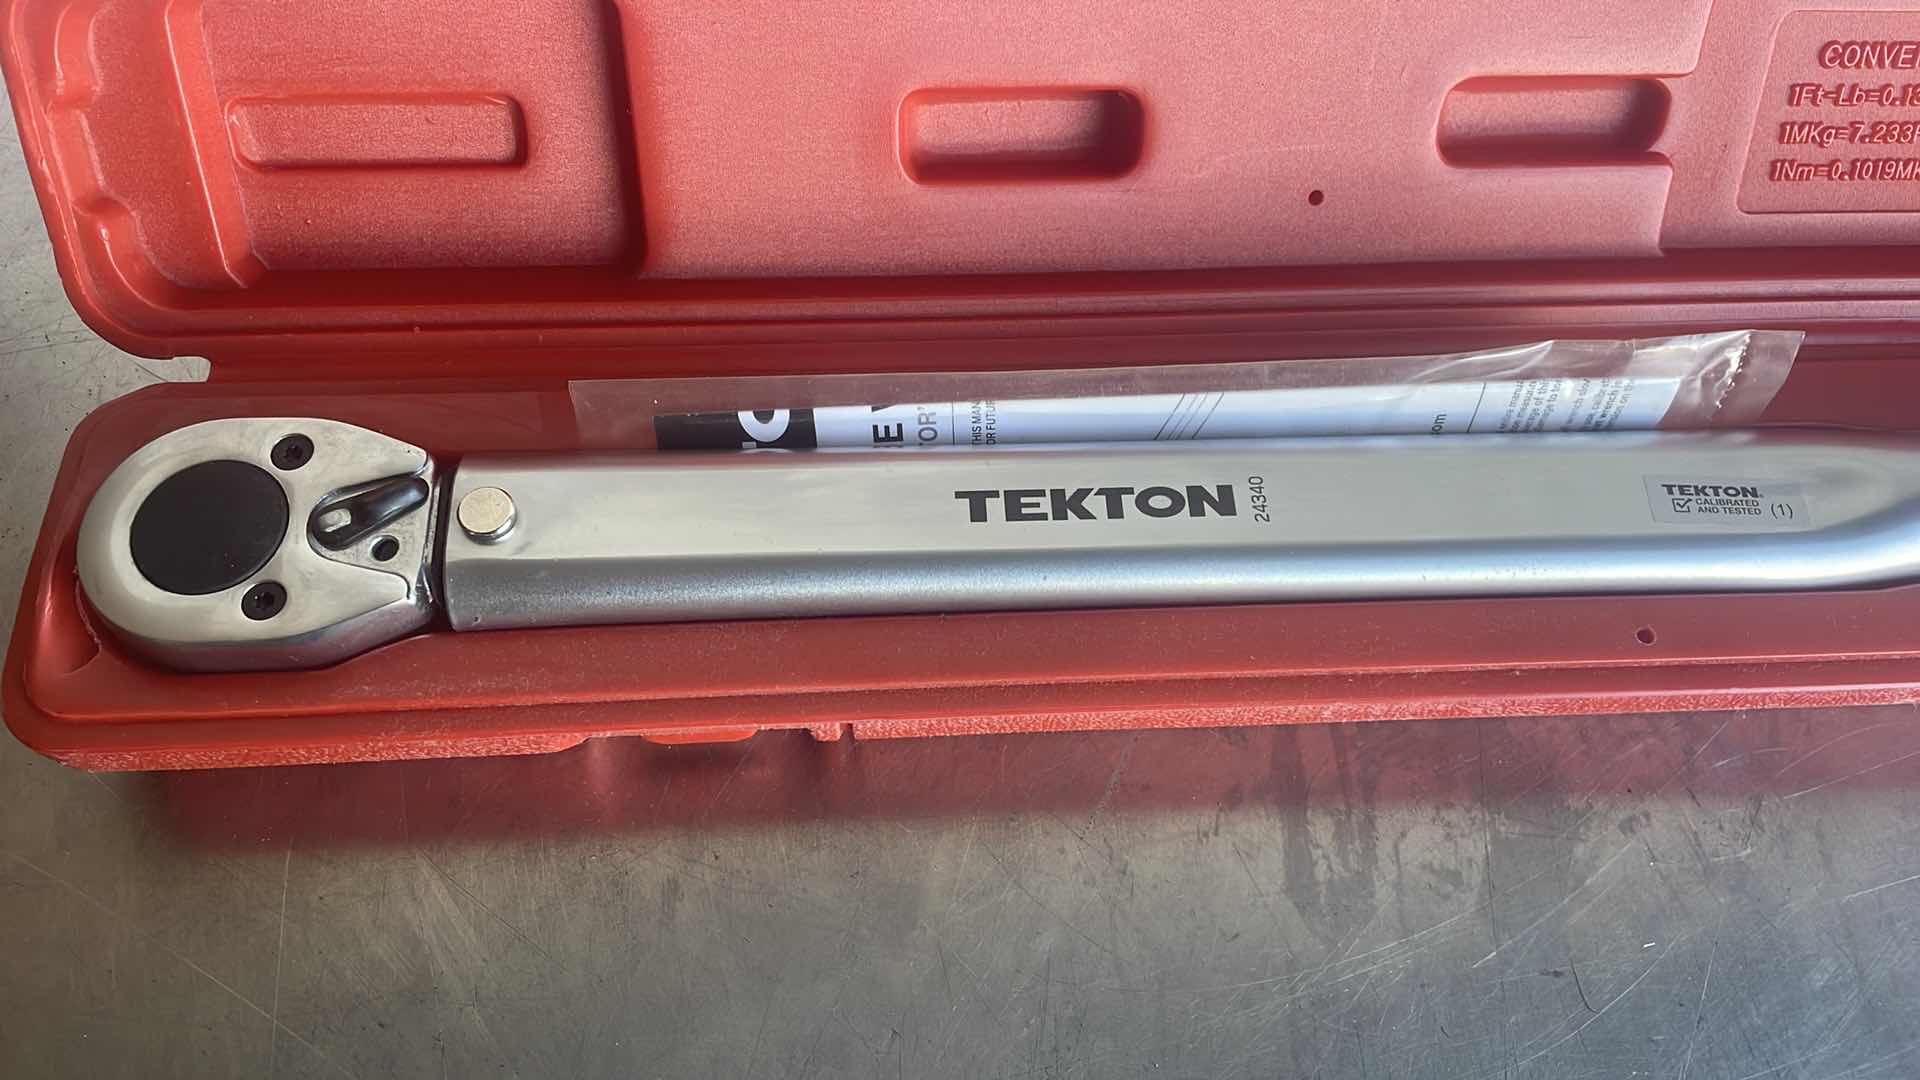 Photo 2 of TEKTON 1/2” DRIVE TORQUE WRENCH 24340 IN CASE